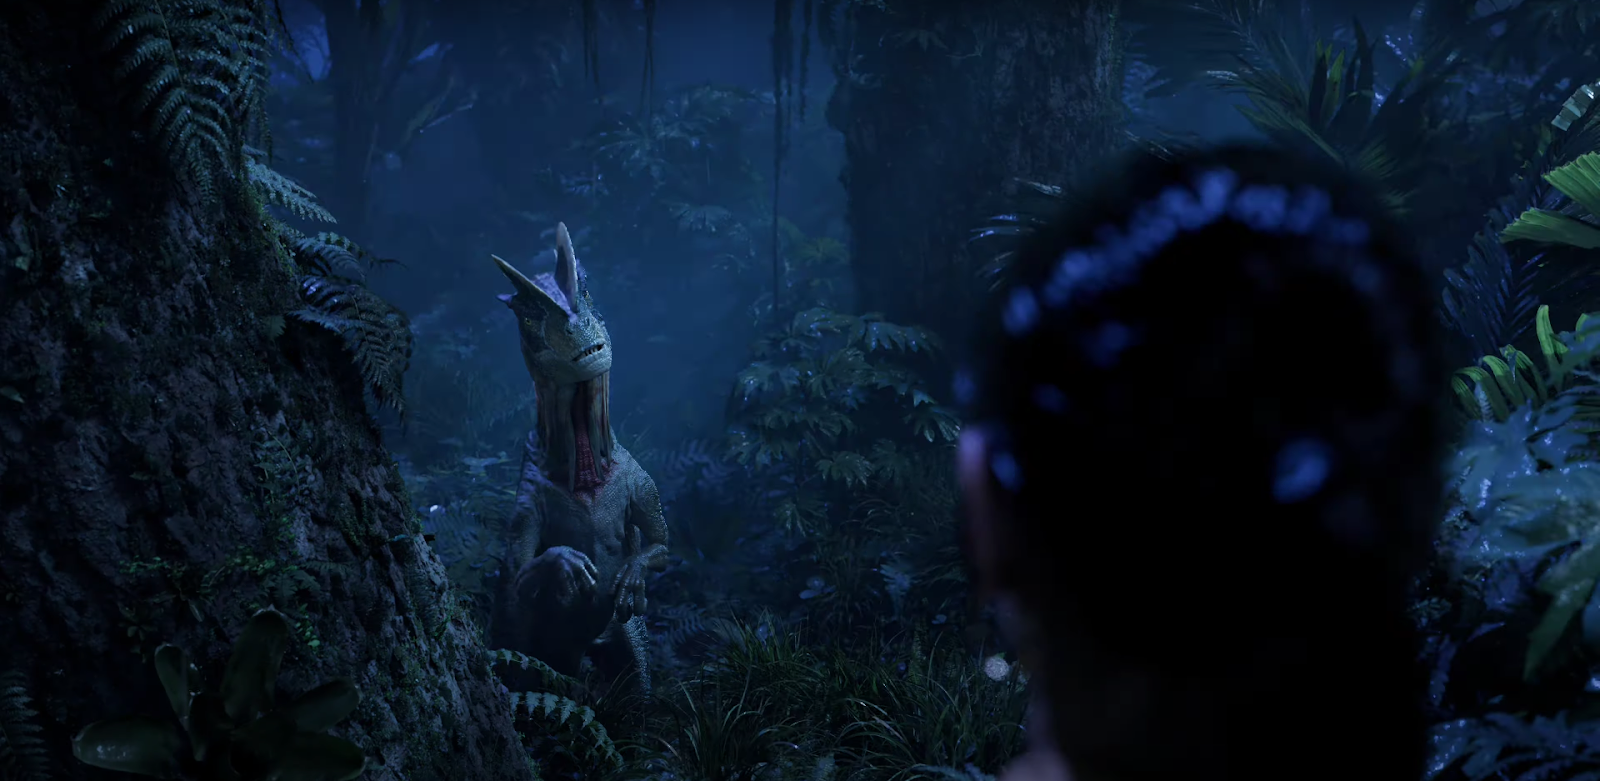 Jurassic Park Survival Is Back From the Dead as a New Action Game